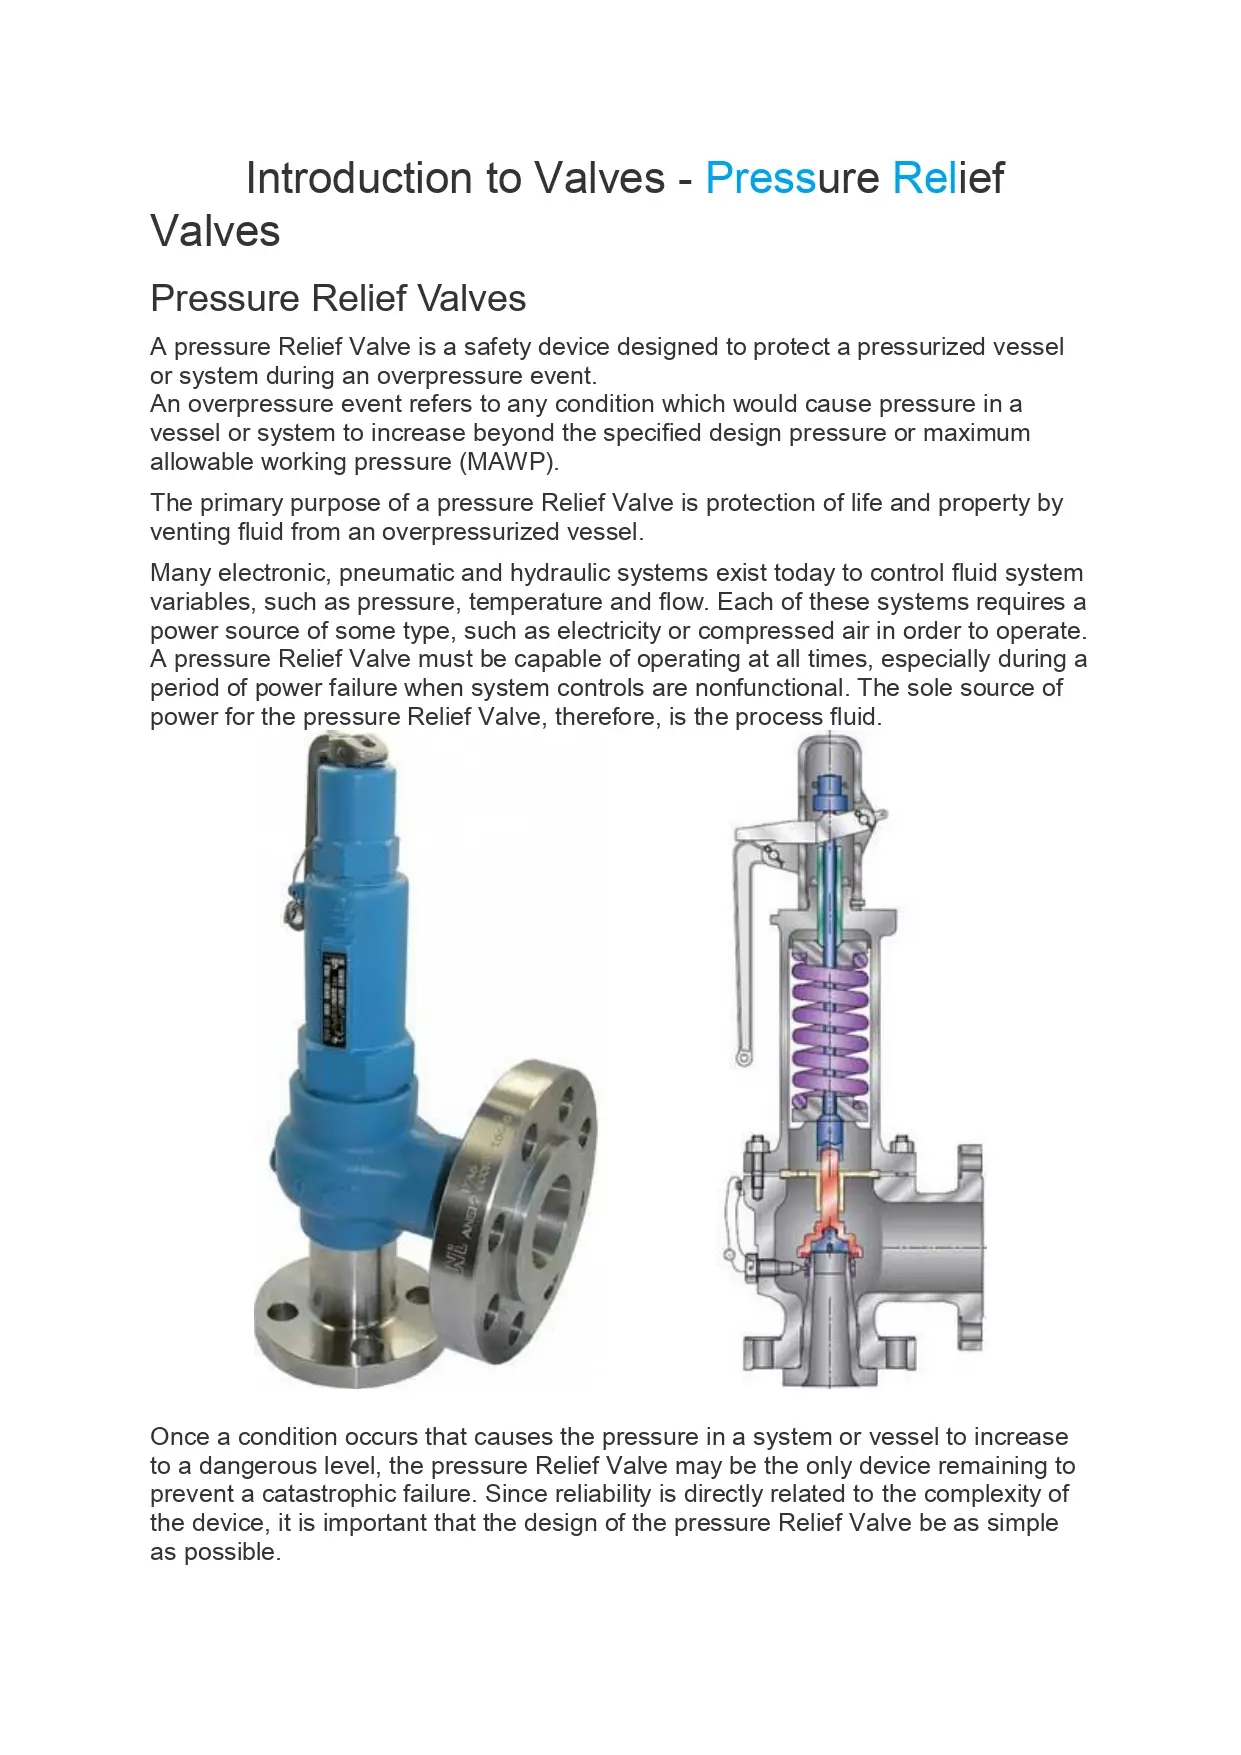 Introduction to Valves - Pressure Relief